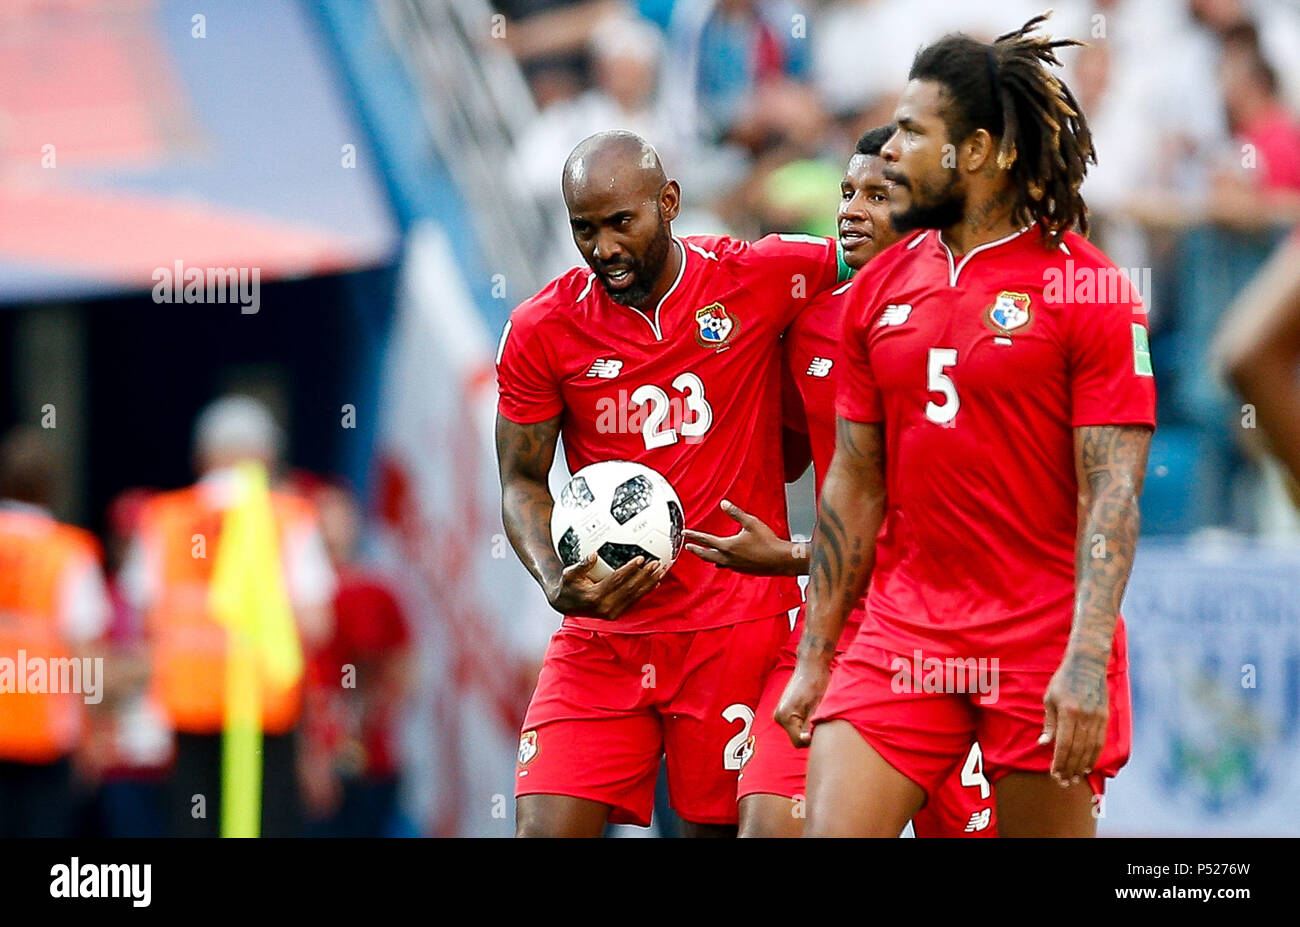 Nijni Novgorod, Russia. 24th June, 2018:ENGLAND VS. PANAMA - Felipe Baloy of Panama celebrates after scoring the first goal of Panama in the history of the World Cups during a match between England and Panama valid for the second round of group G of the 2018 World Cup, held at the Nizhny Novgorod stadium in the city of Nihzny Novgorod, Russia. (Photo: Marcelo Machado de Melo/Fotoarena) Credit: Foto Arena LTDA/Alamy Live News Stock Photo